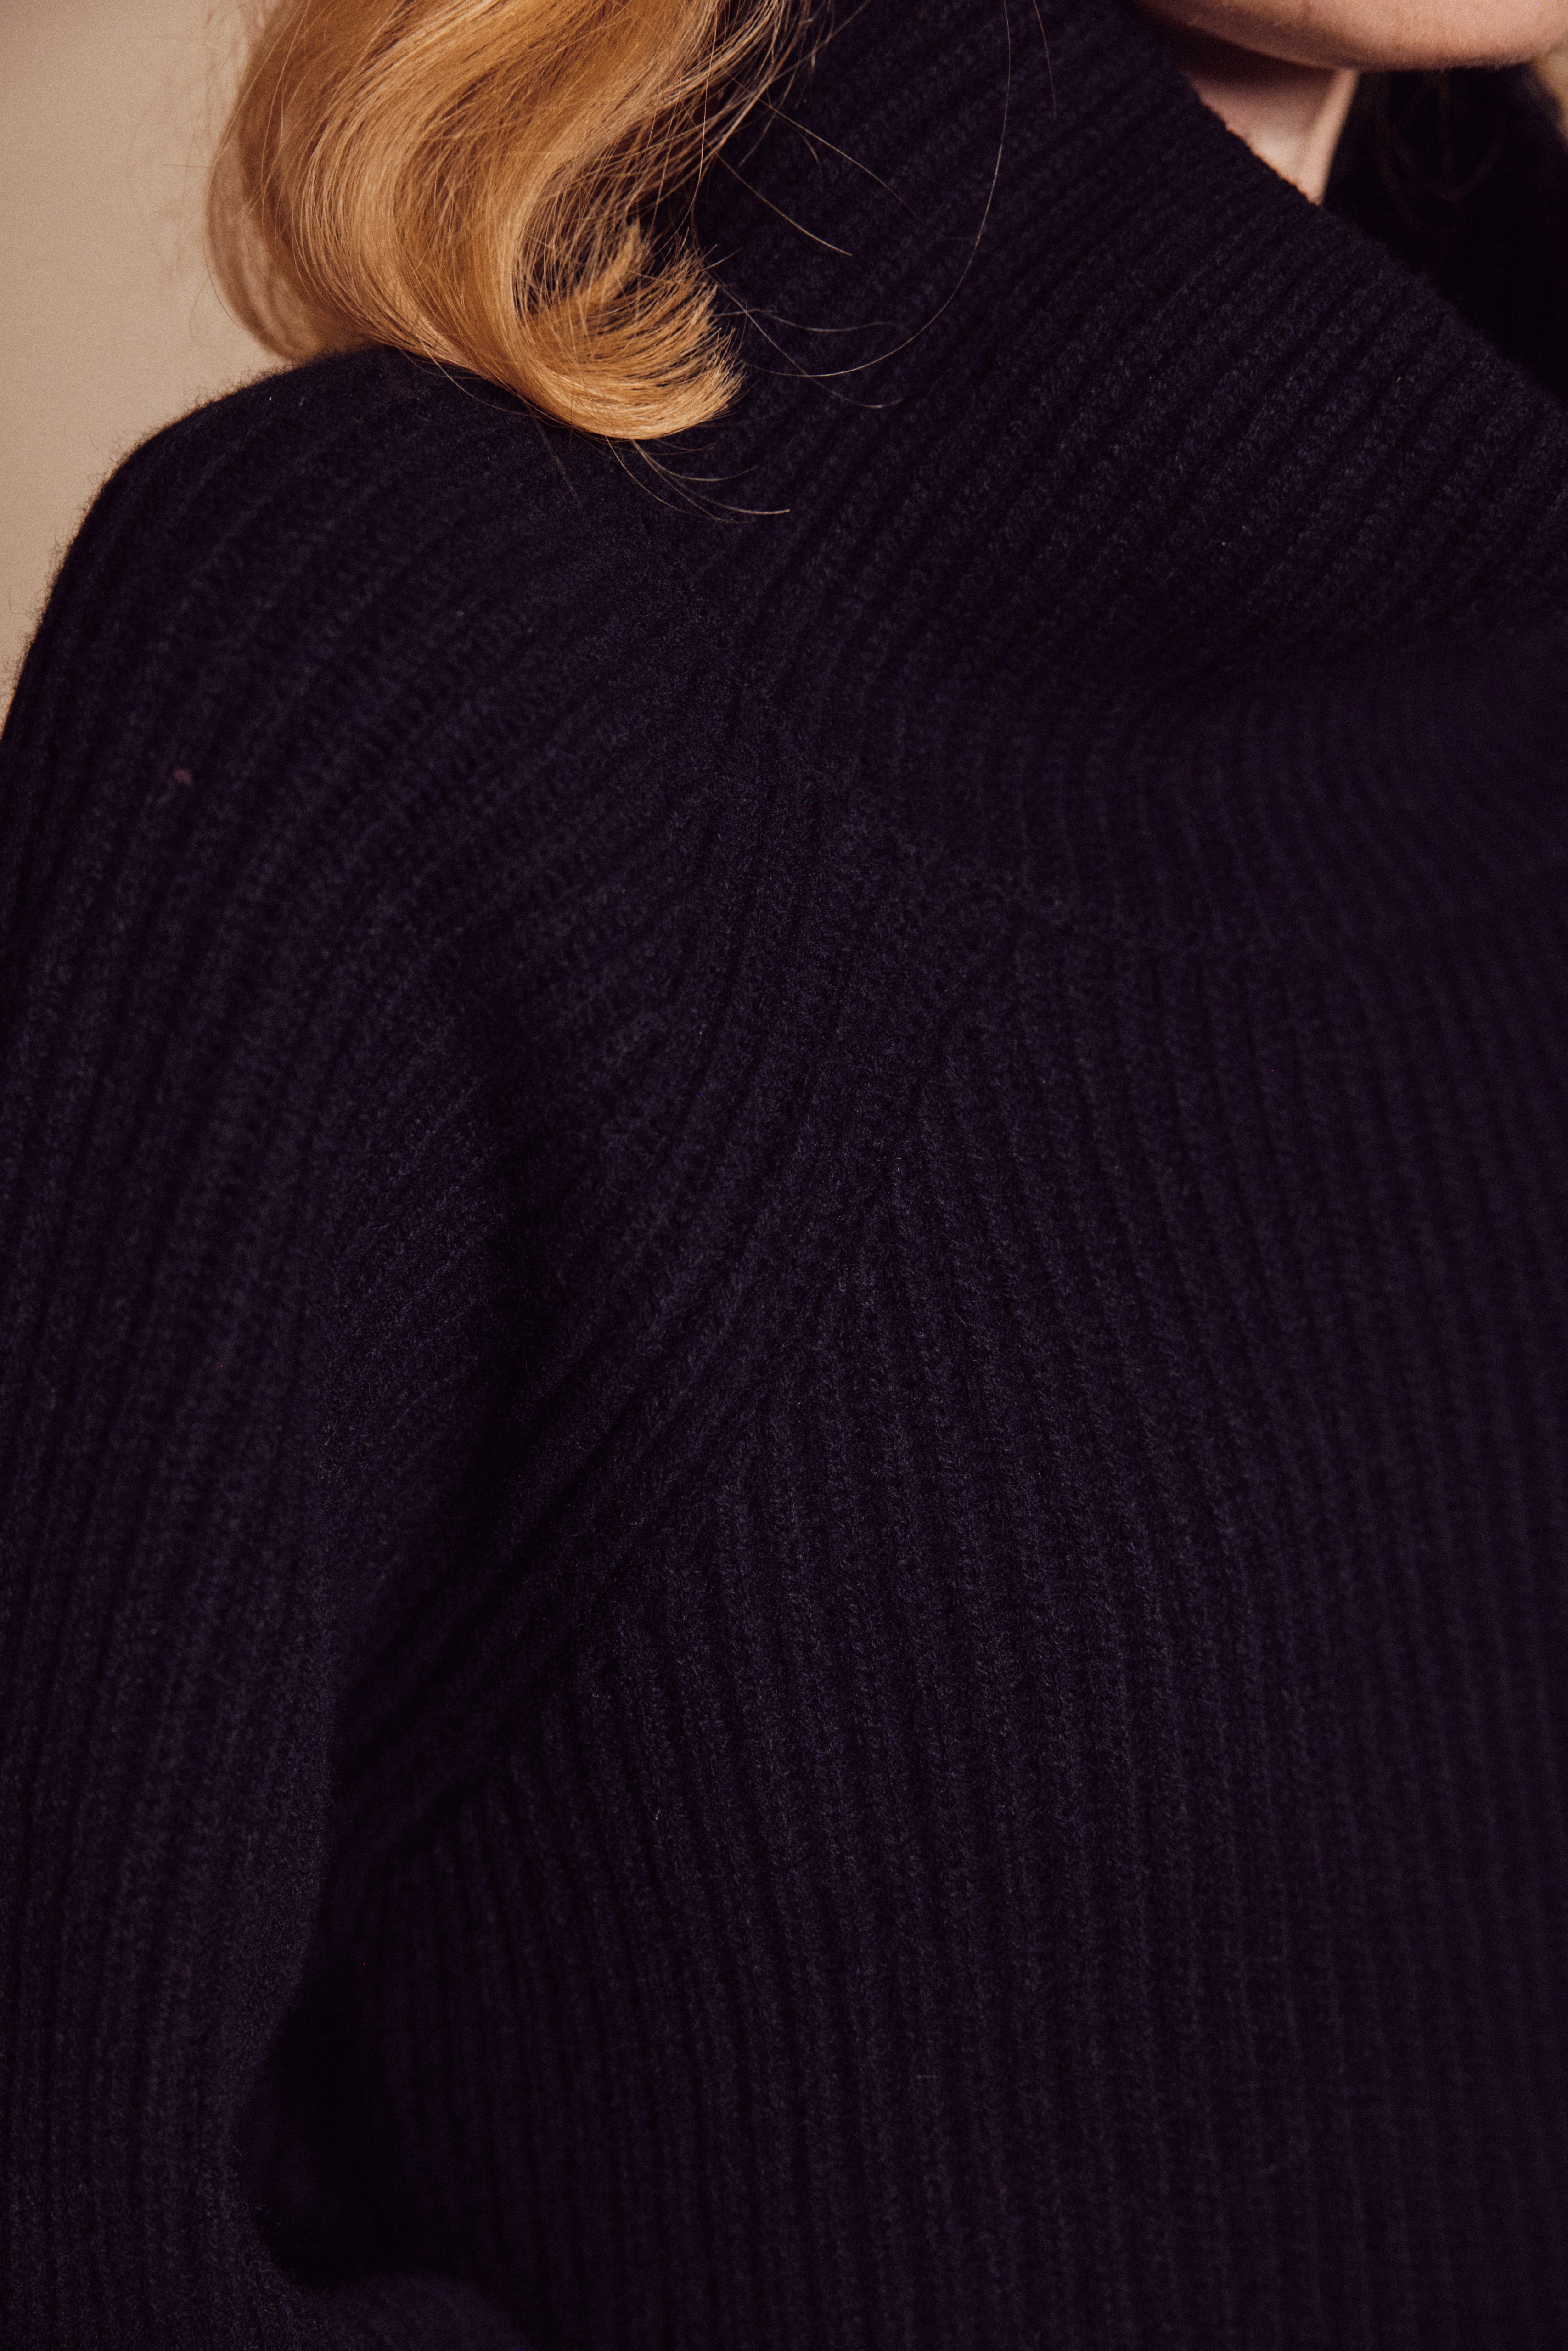 THE CAITLIN SWEATER in black